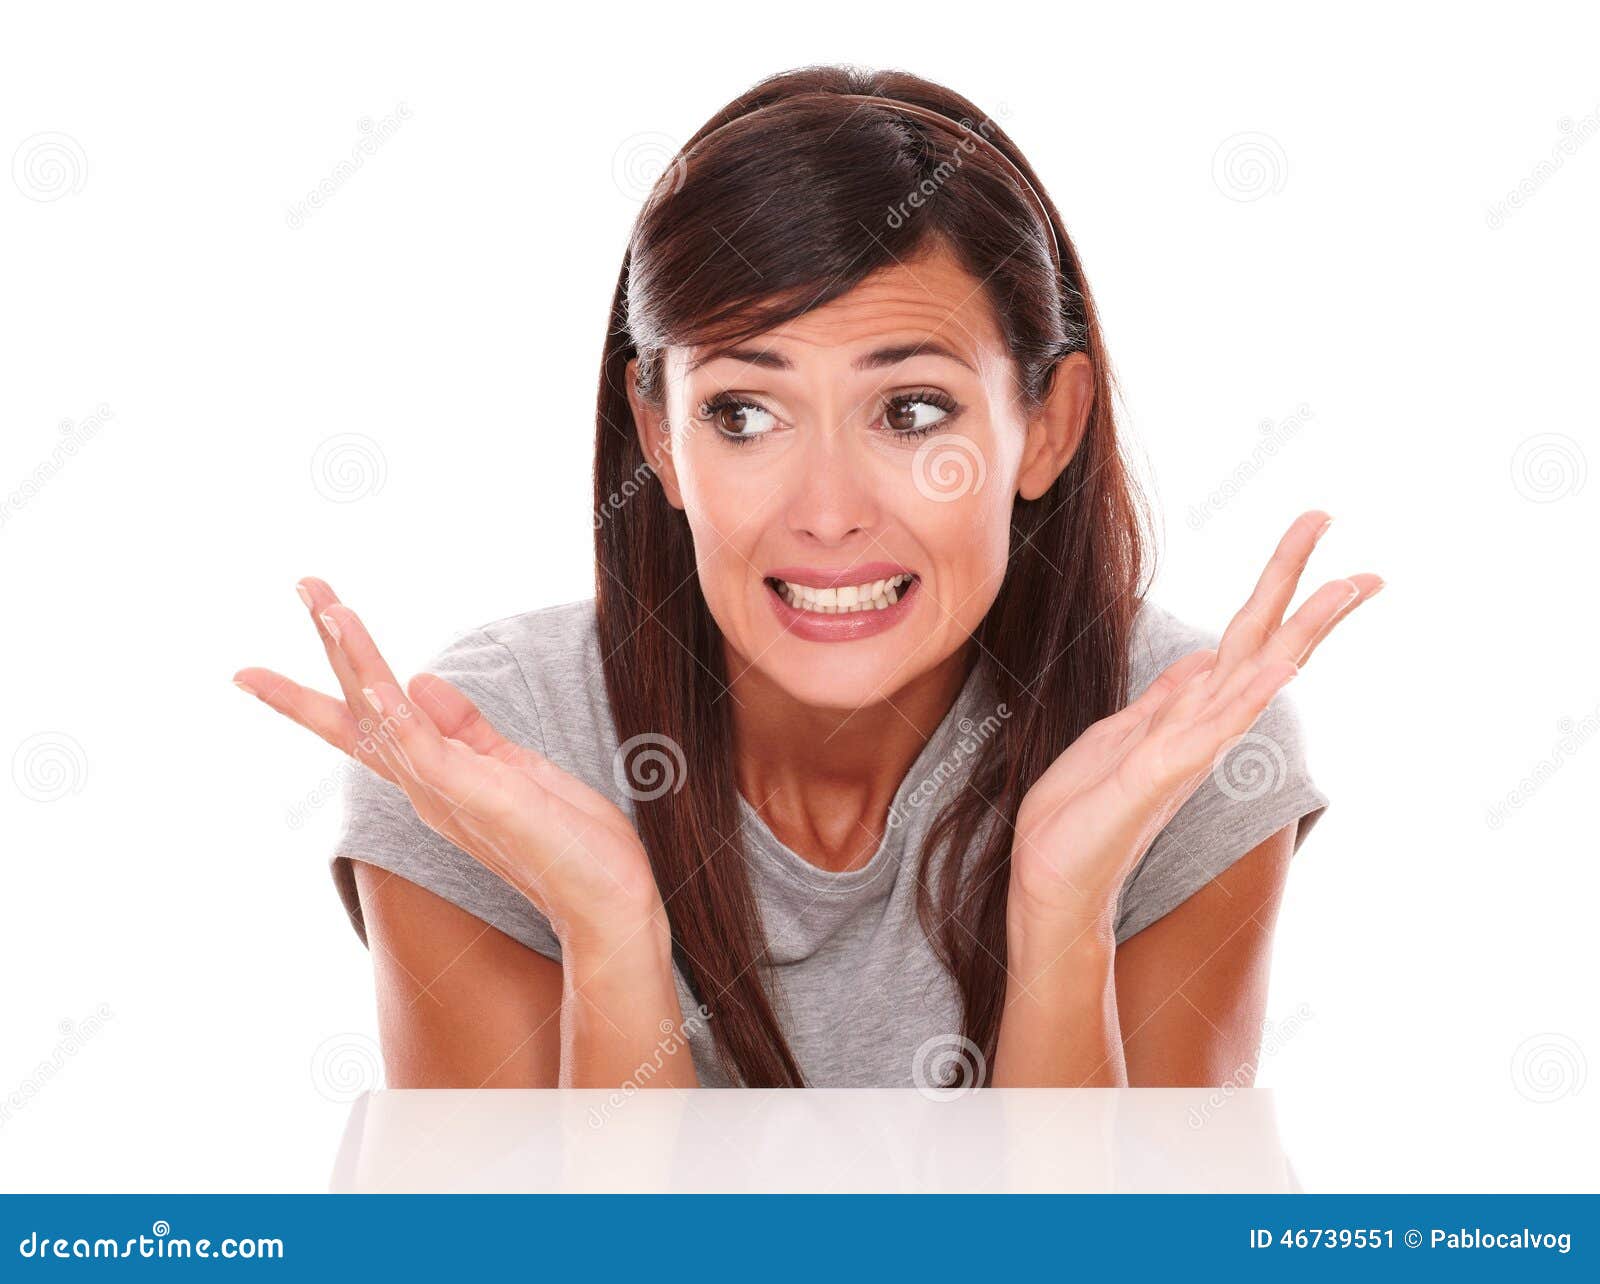 http://thumbs.dreamstime.com/z/surprised-latin-woman-errors-hands-headshot-portrait-error-looking-to-her-right-isolated-white-background-copyspace-46739551.jpg